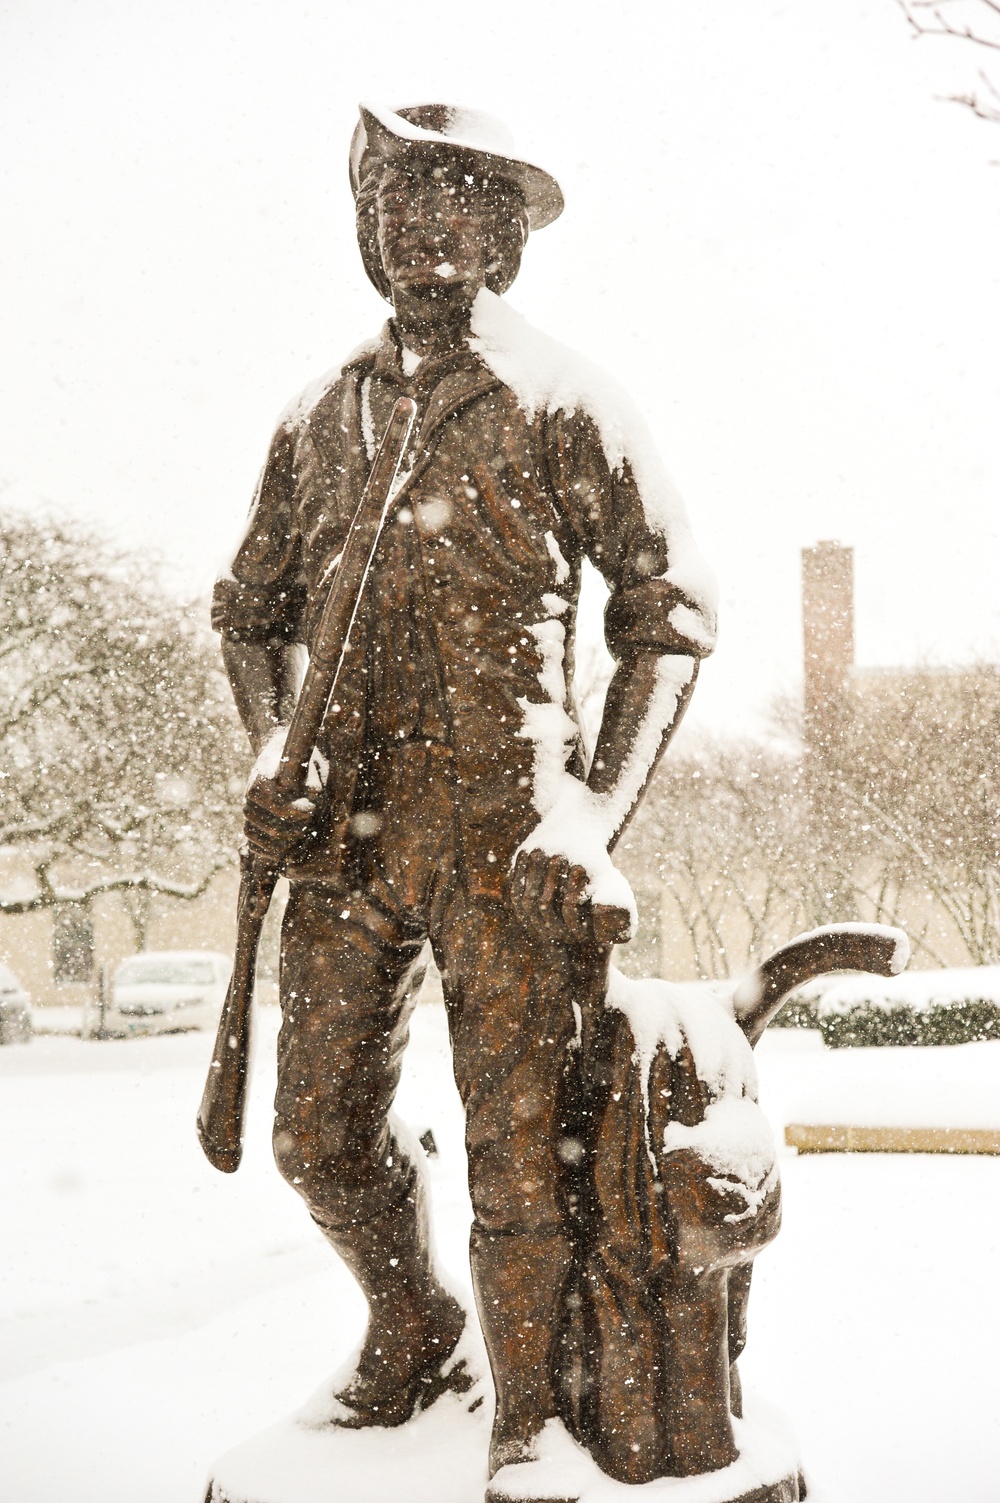 Ohio National Guard Minuteman stands guard during winter squall